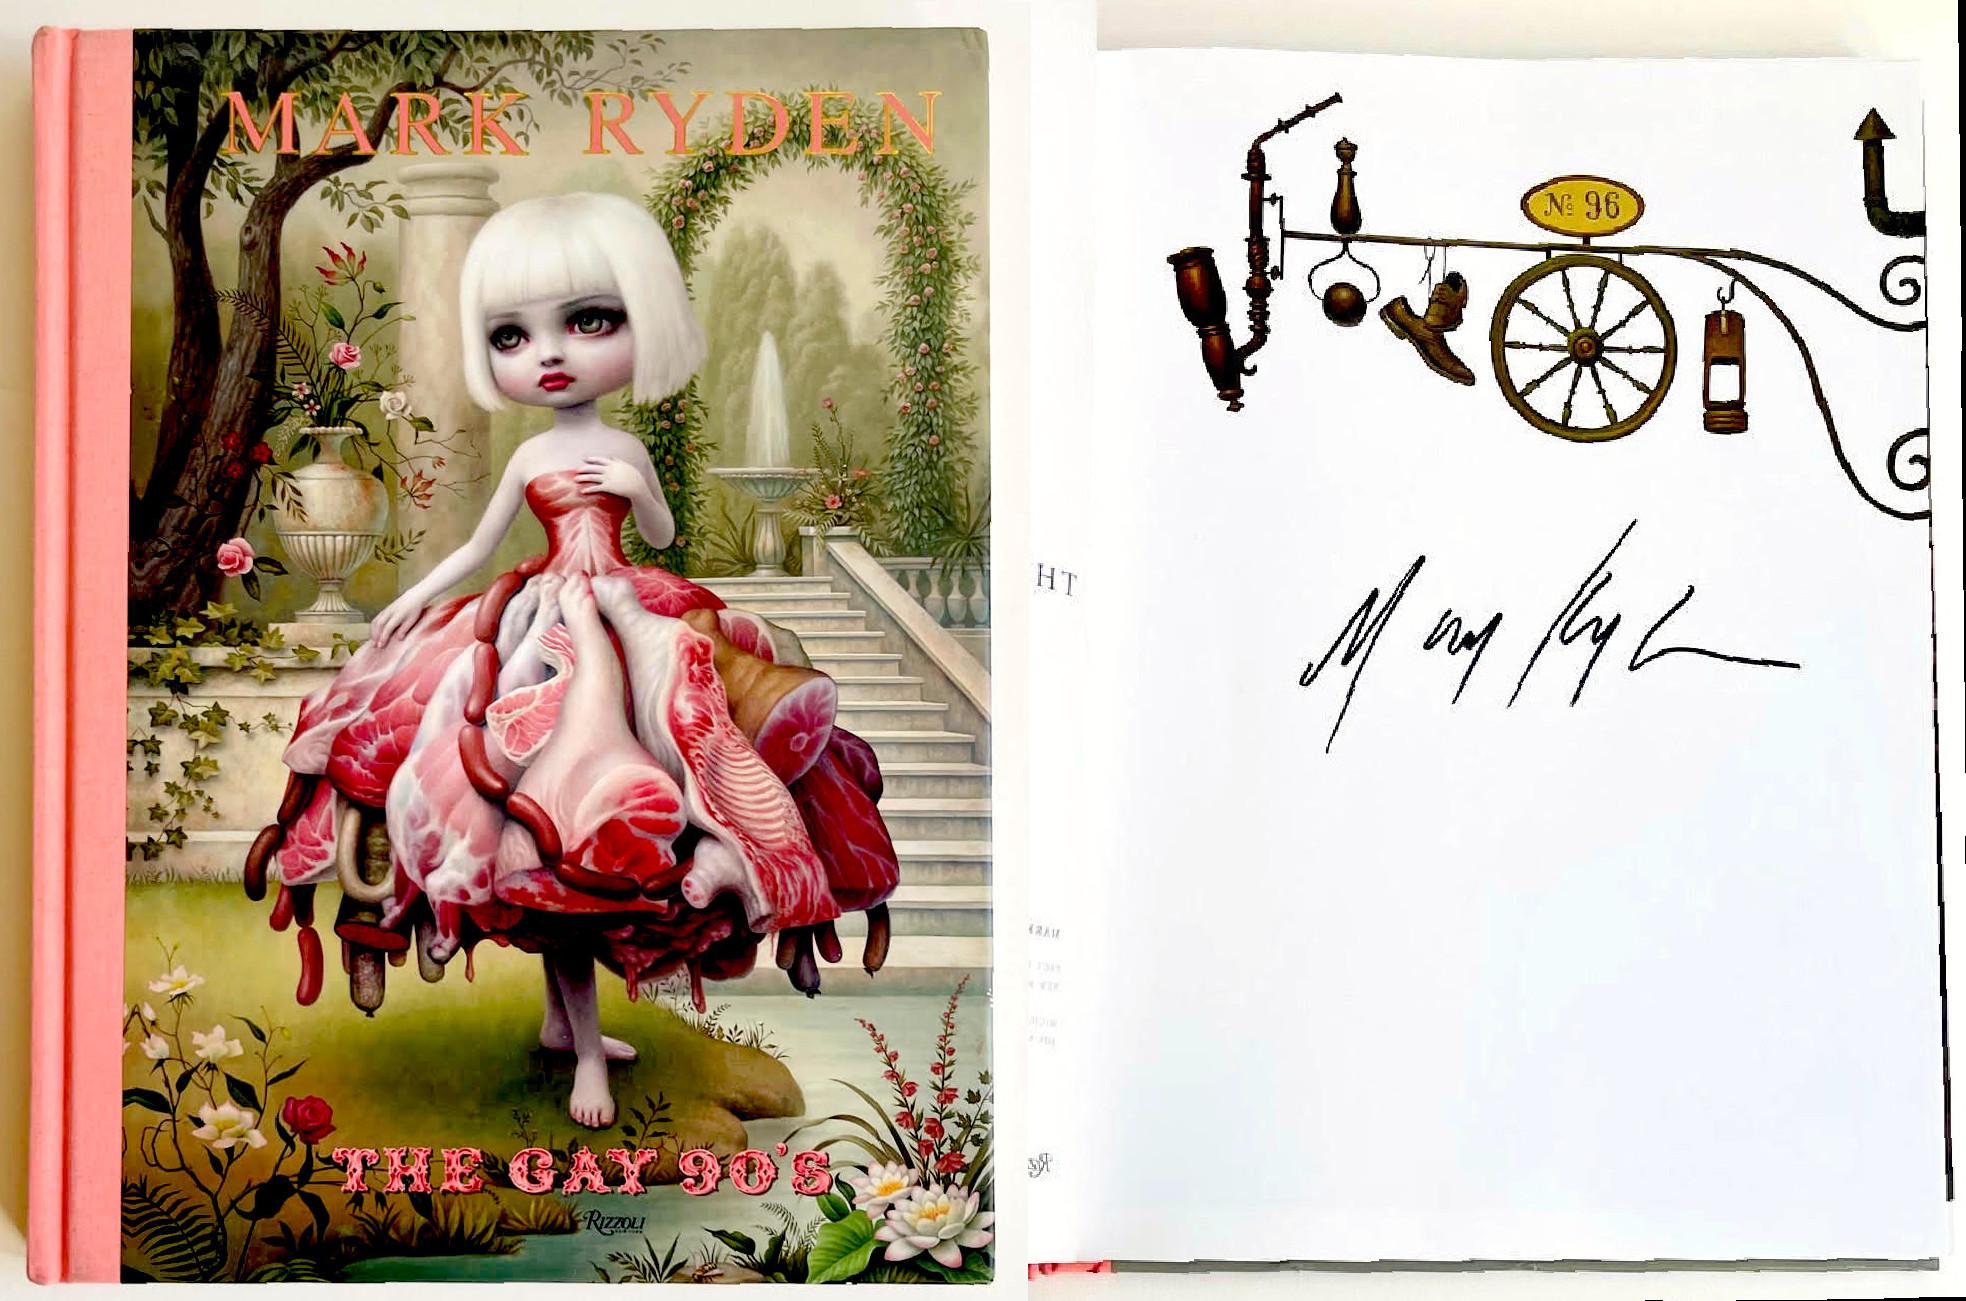 Mark Ryden
The Gay 90's (Hand signed by Mark Ryden), 2013
Hardback monograph (hand signed by Mark Ryden)
Boldy signed by Mark Ryden
12 1/4 × 9 1/4 × 1 inches
This elegant hardback monograph with illustrated covers and no dust jacket, as issued, was